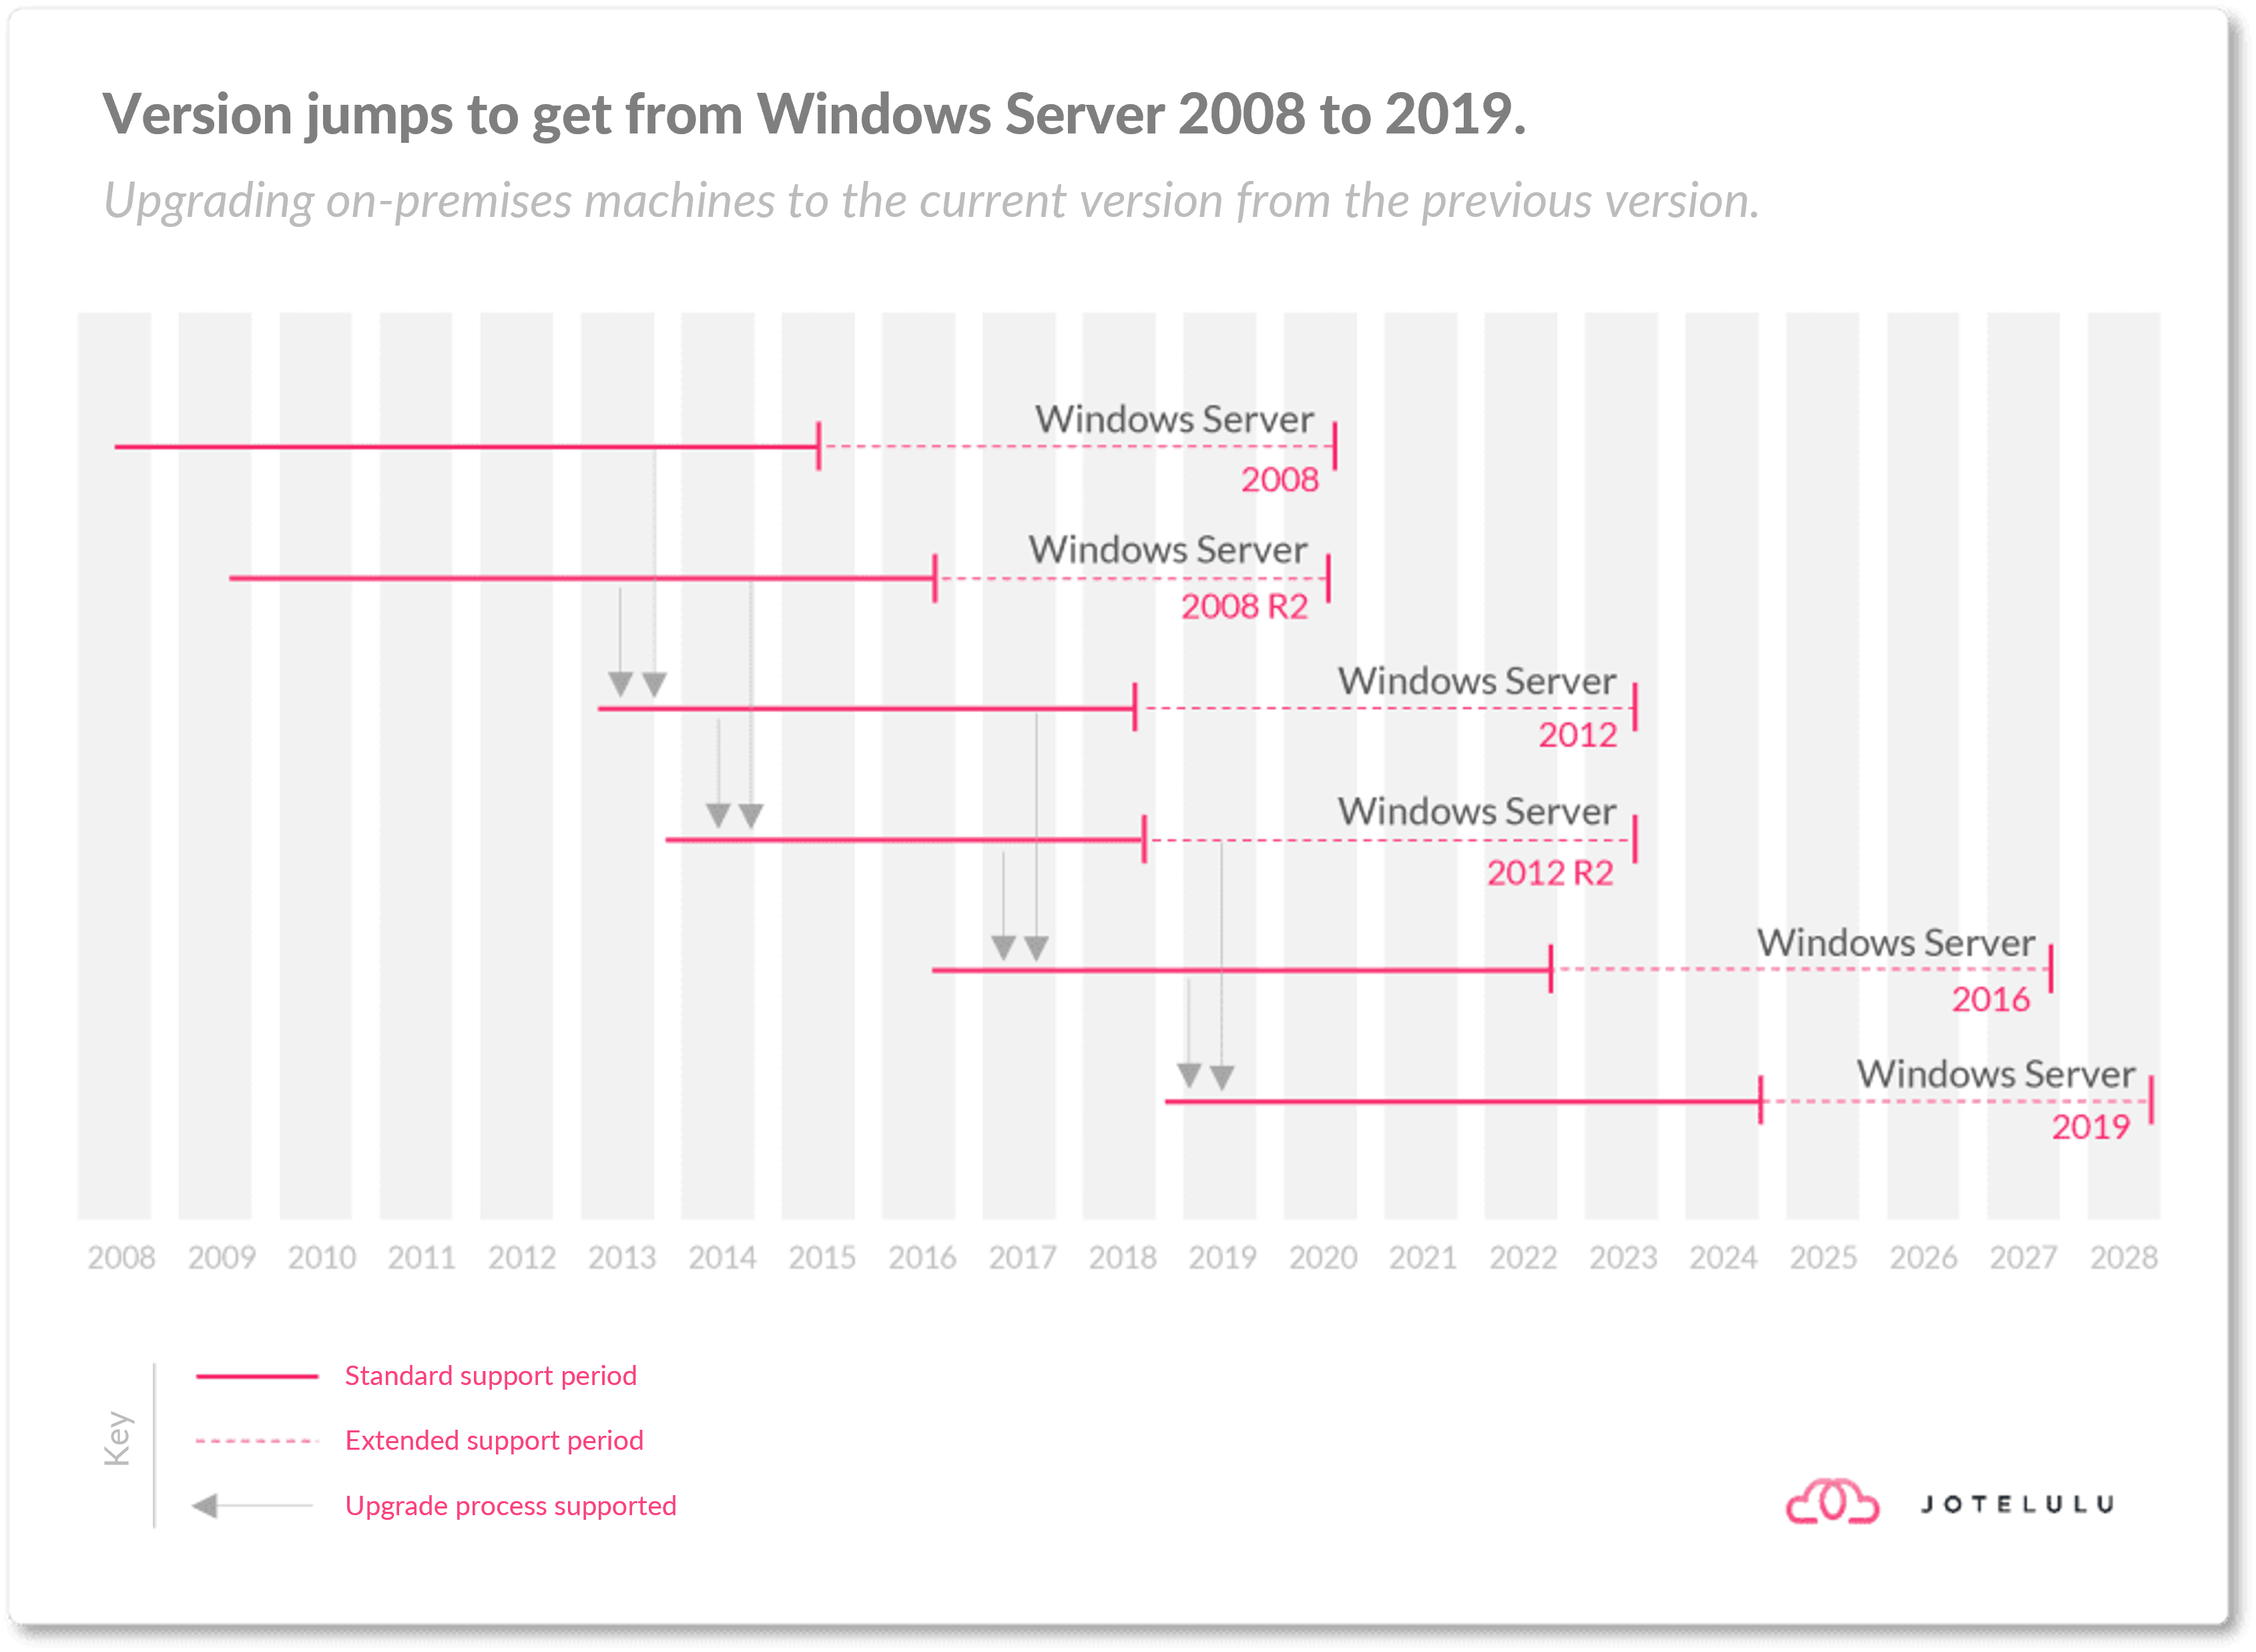 Version jumps to get from Windows Server 2008 to 2019